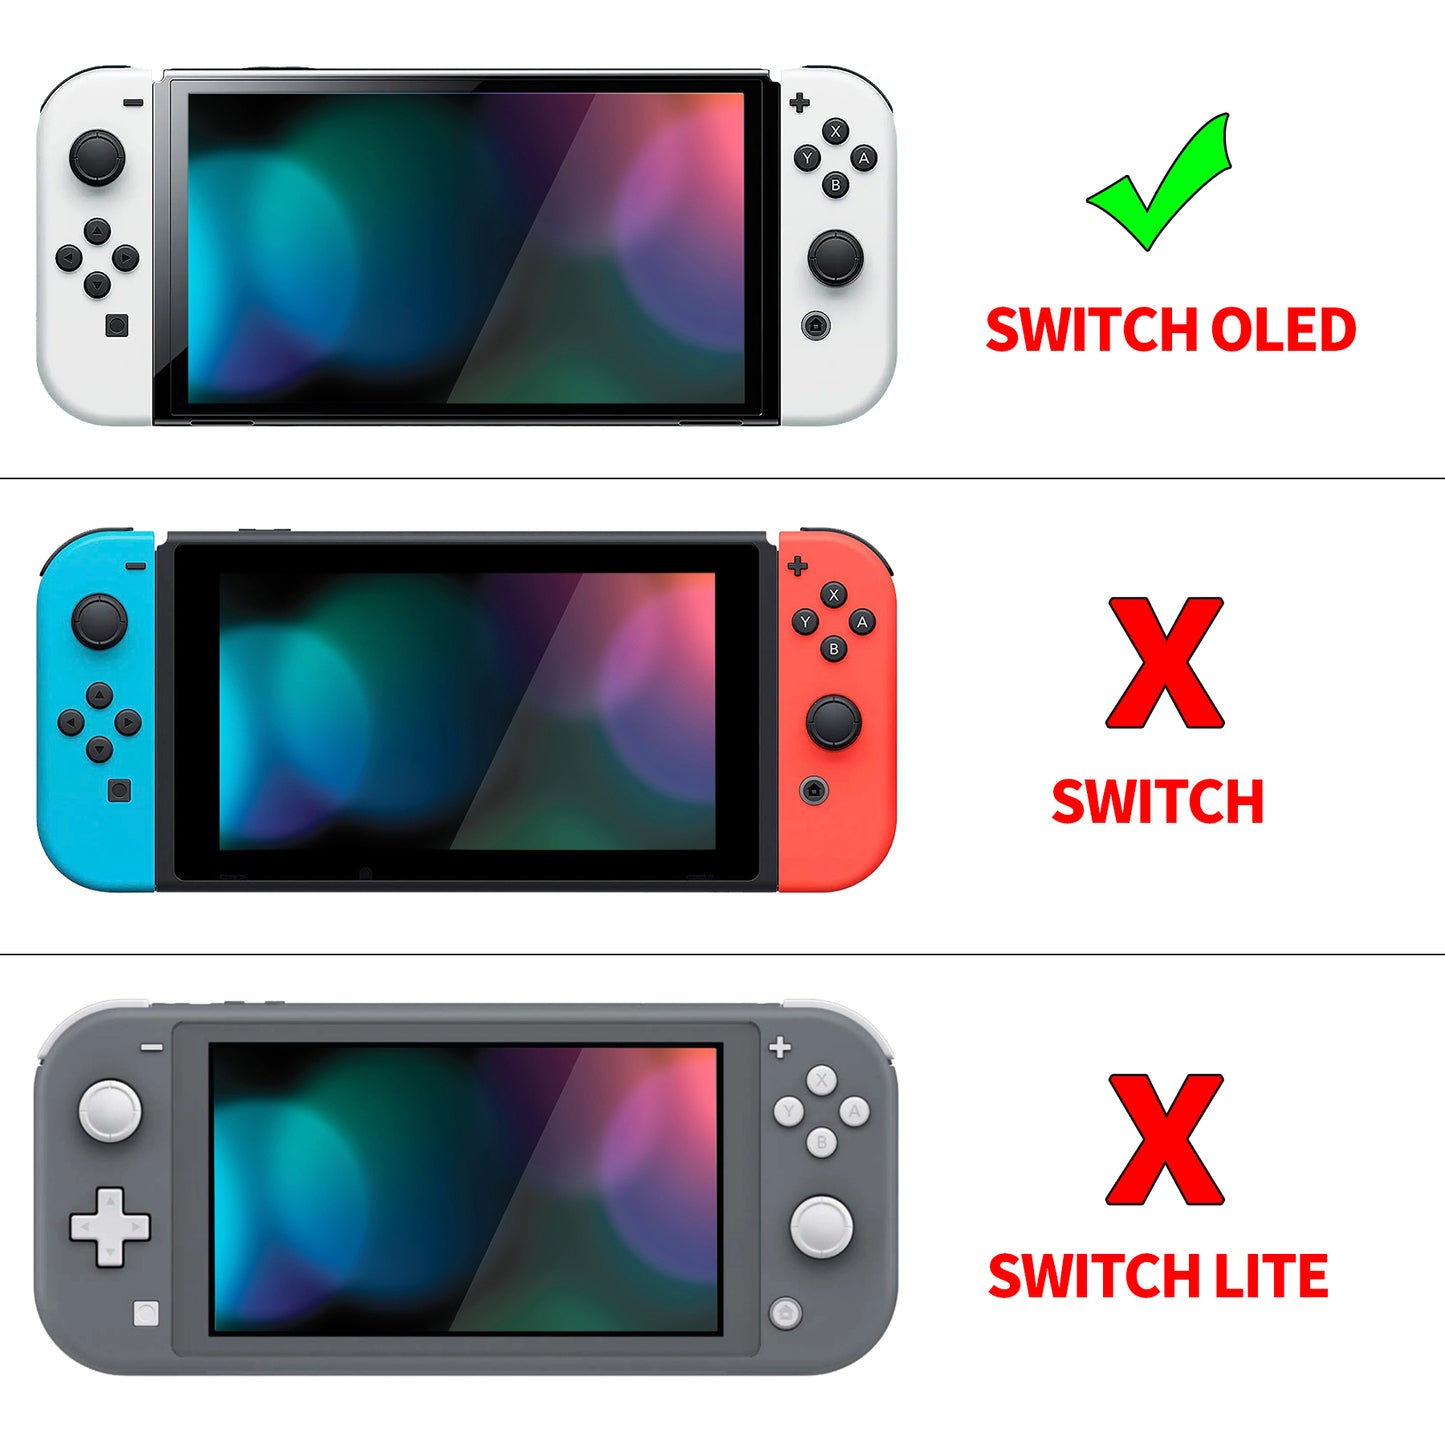 PlayVital ZealProtect Soft Protective Case for Switch OLED, Flexible Protector Joycon Grip Cover for Switch OLED with Thumb Grip Caps & ABXY Direction Button Caps - Little Devils - XSOYV6021 playvital